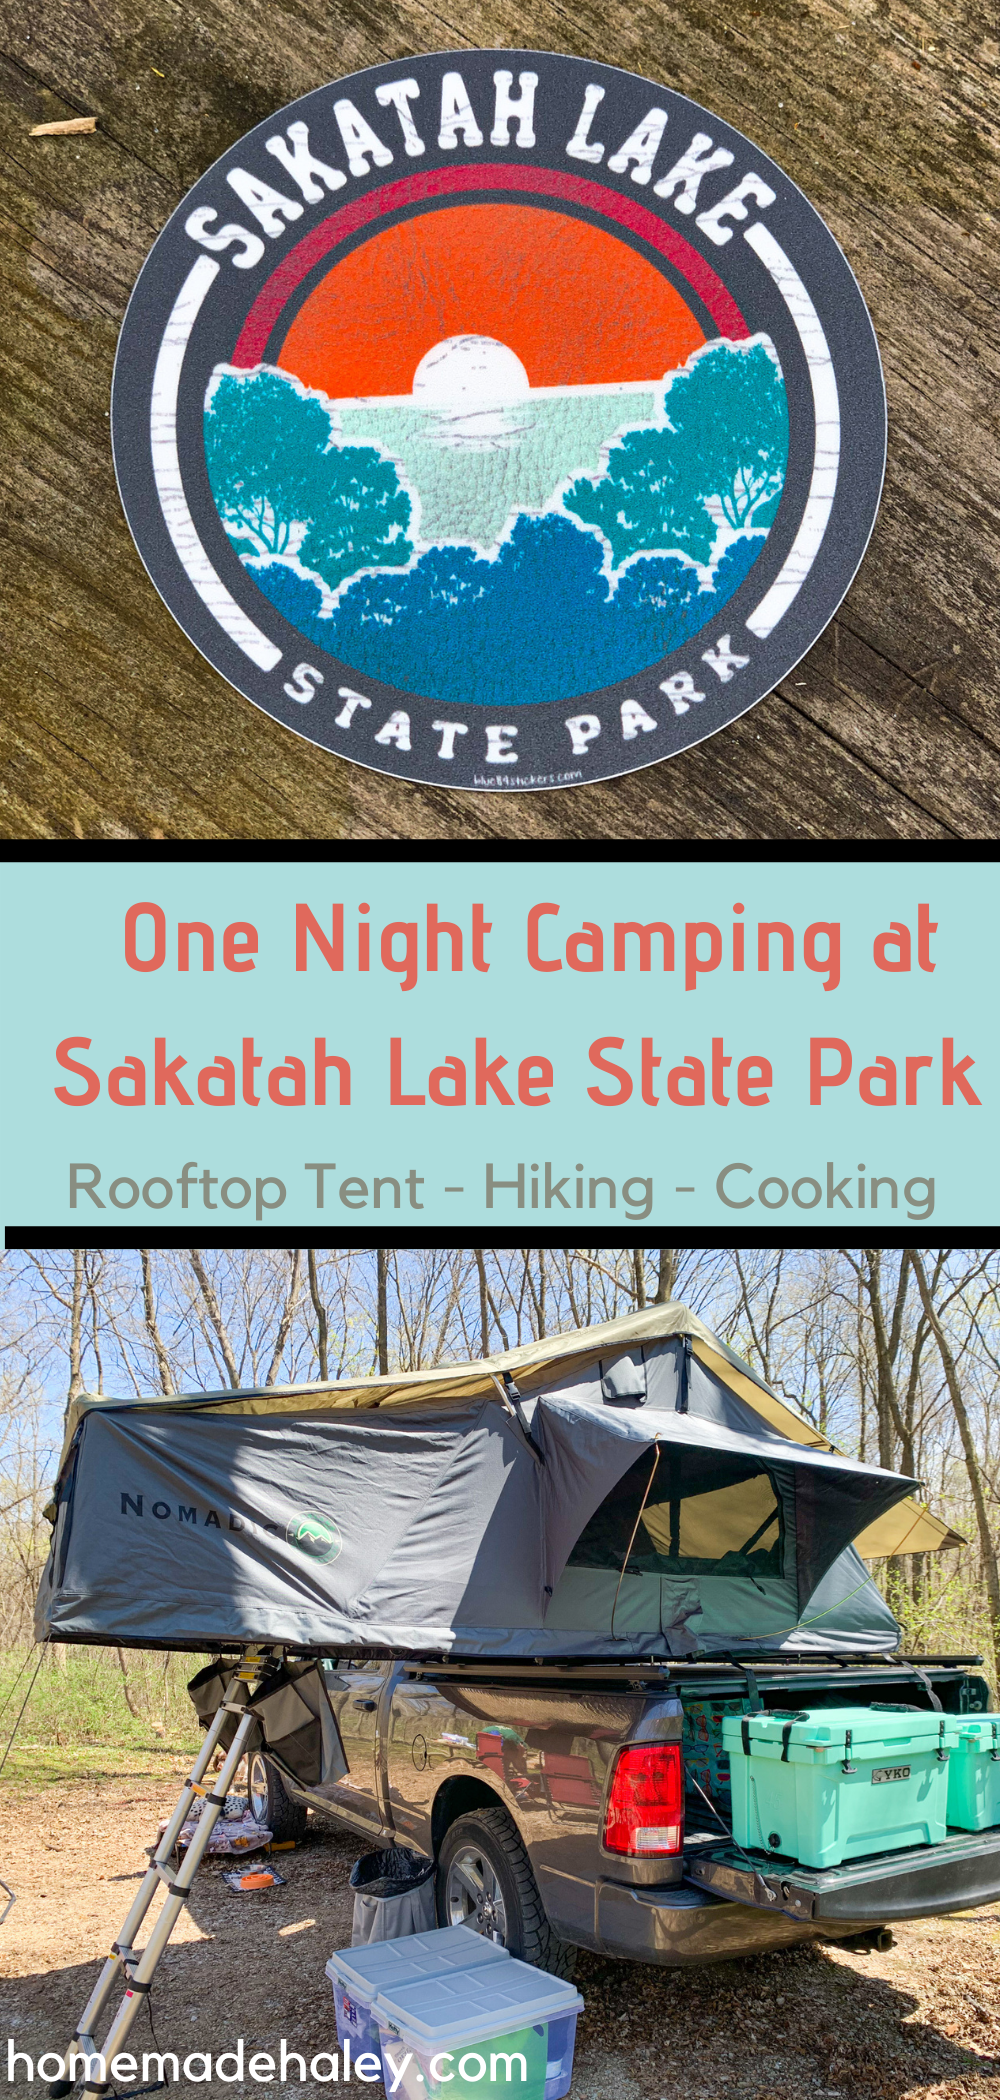 What to do, where to hike, and what to eat while camping overnight at Sakatah Lake State Park!